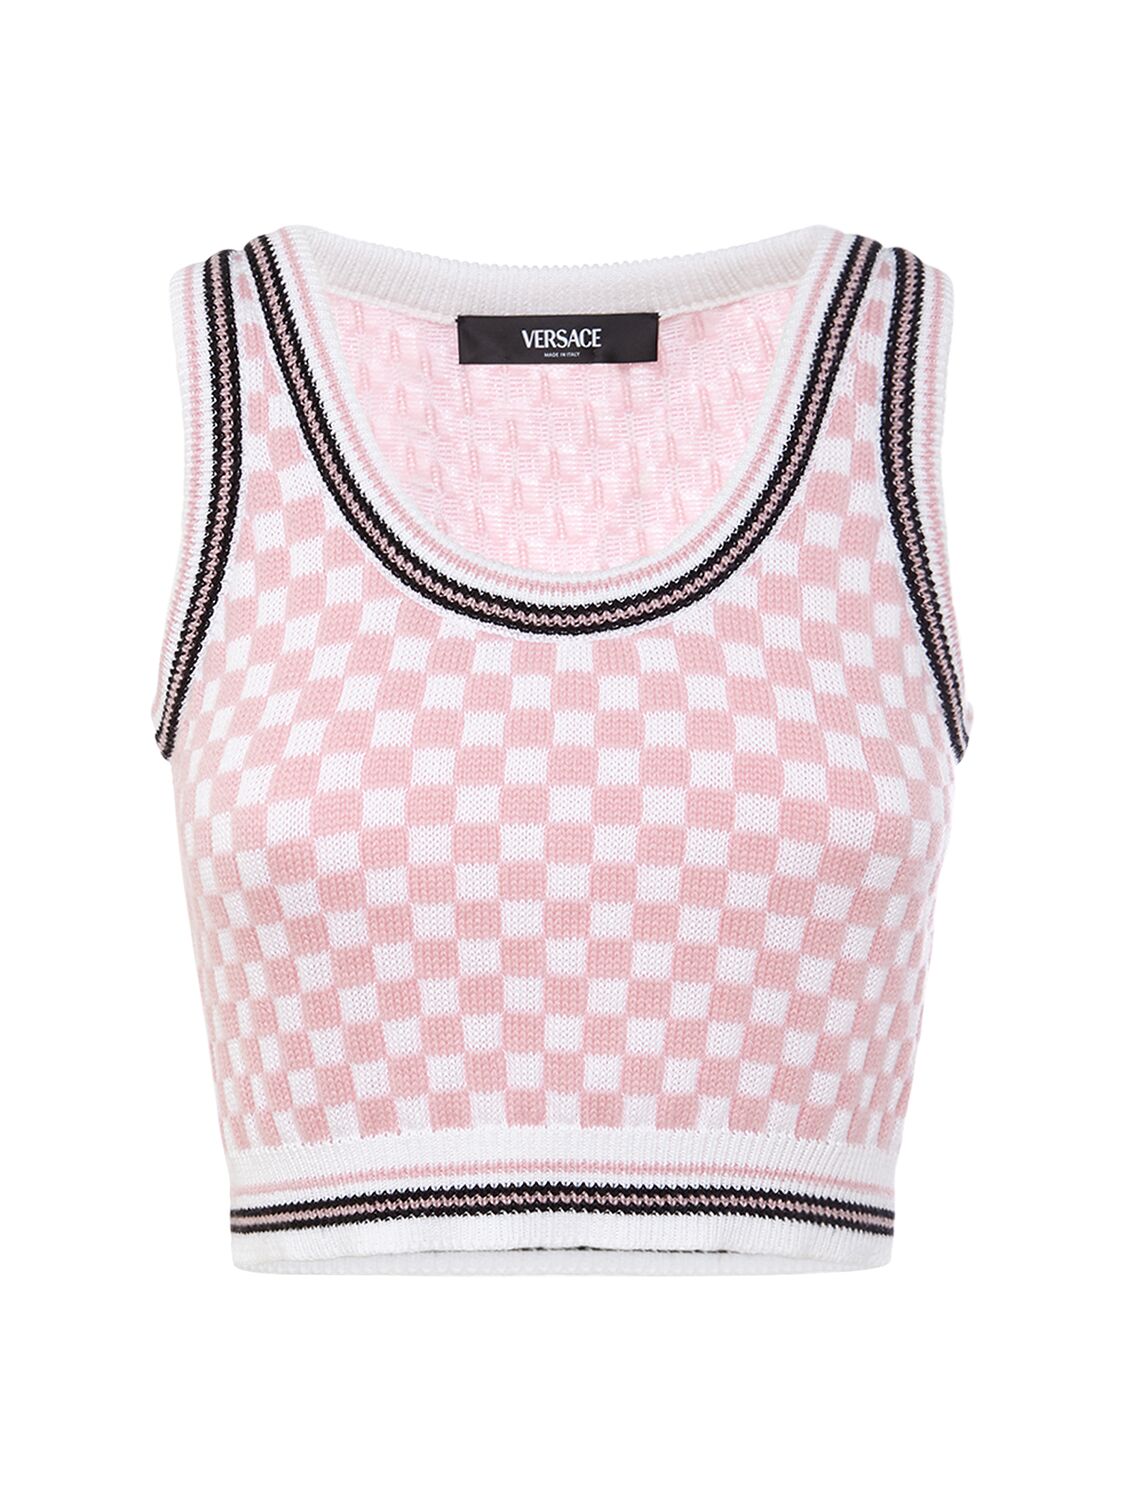 Versace Check Jacquard Knit Sleeveless Crop Top In Pink,multi